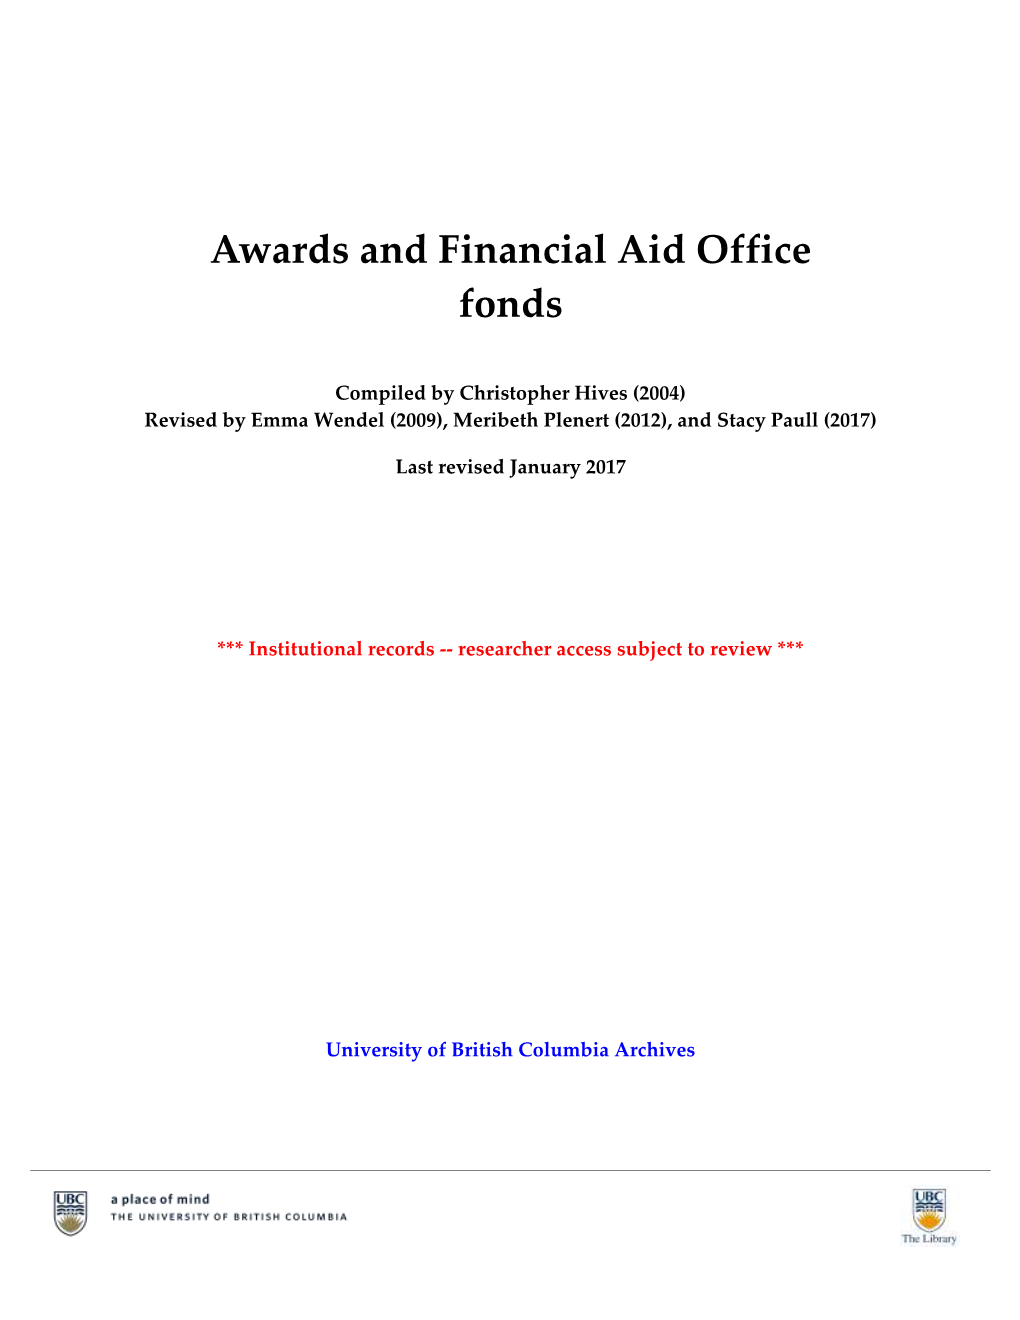 Awards and Financial Aid Office Fonds